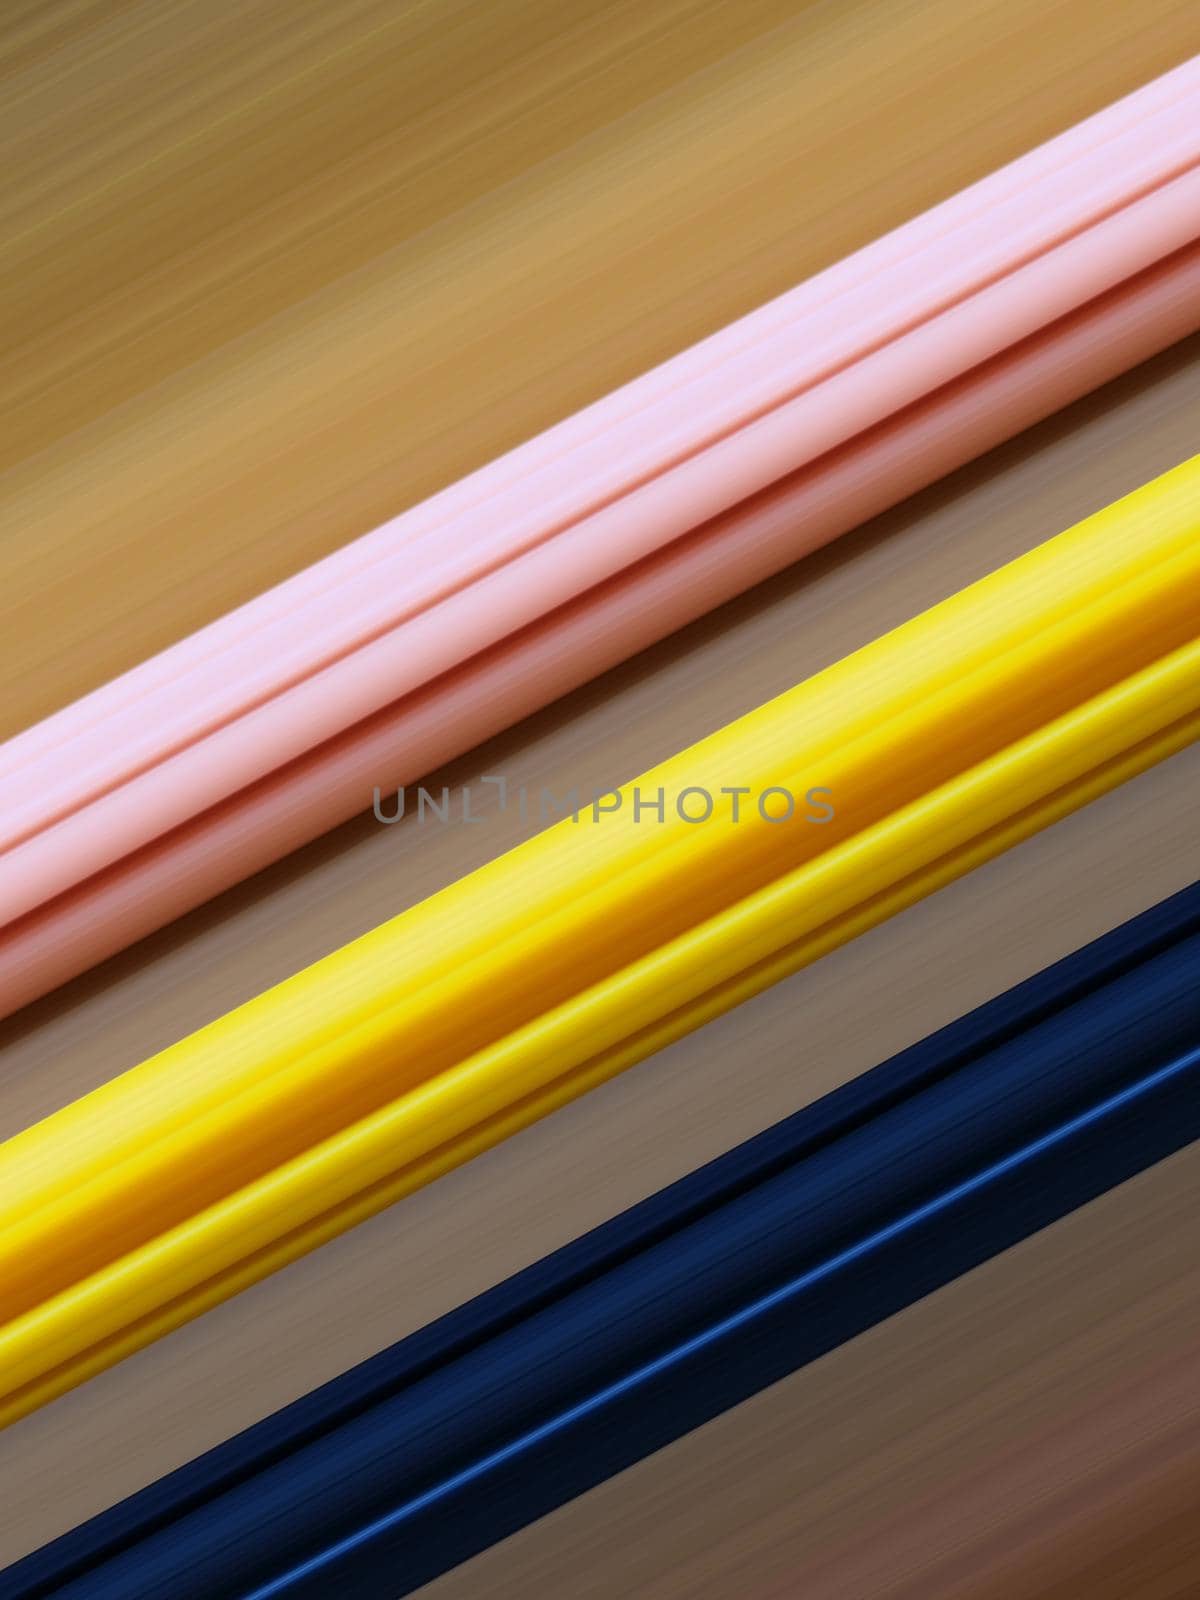 Pink, yellow and navy variegated diagonal lines on the brown background